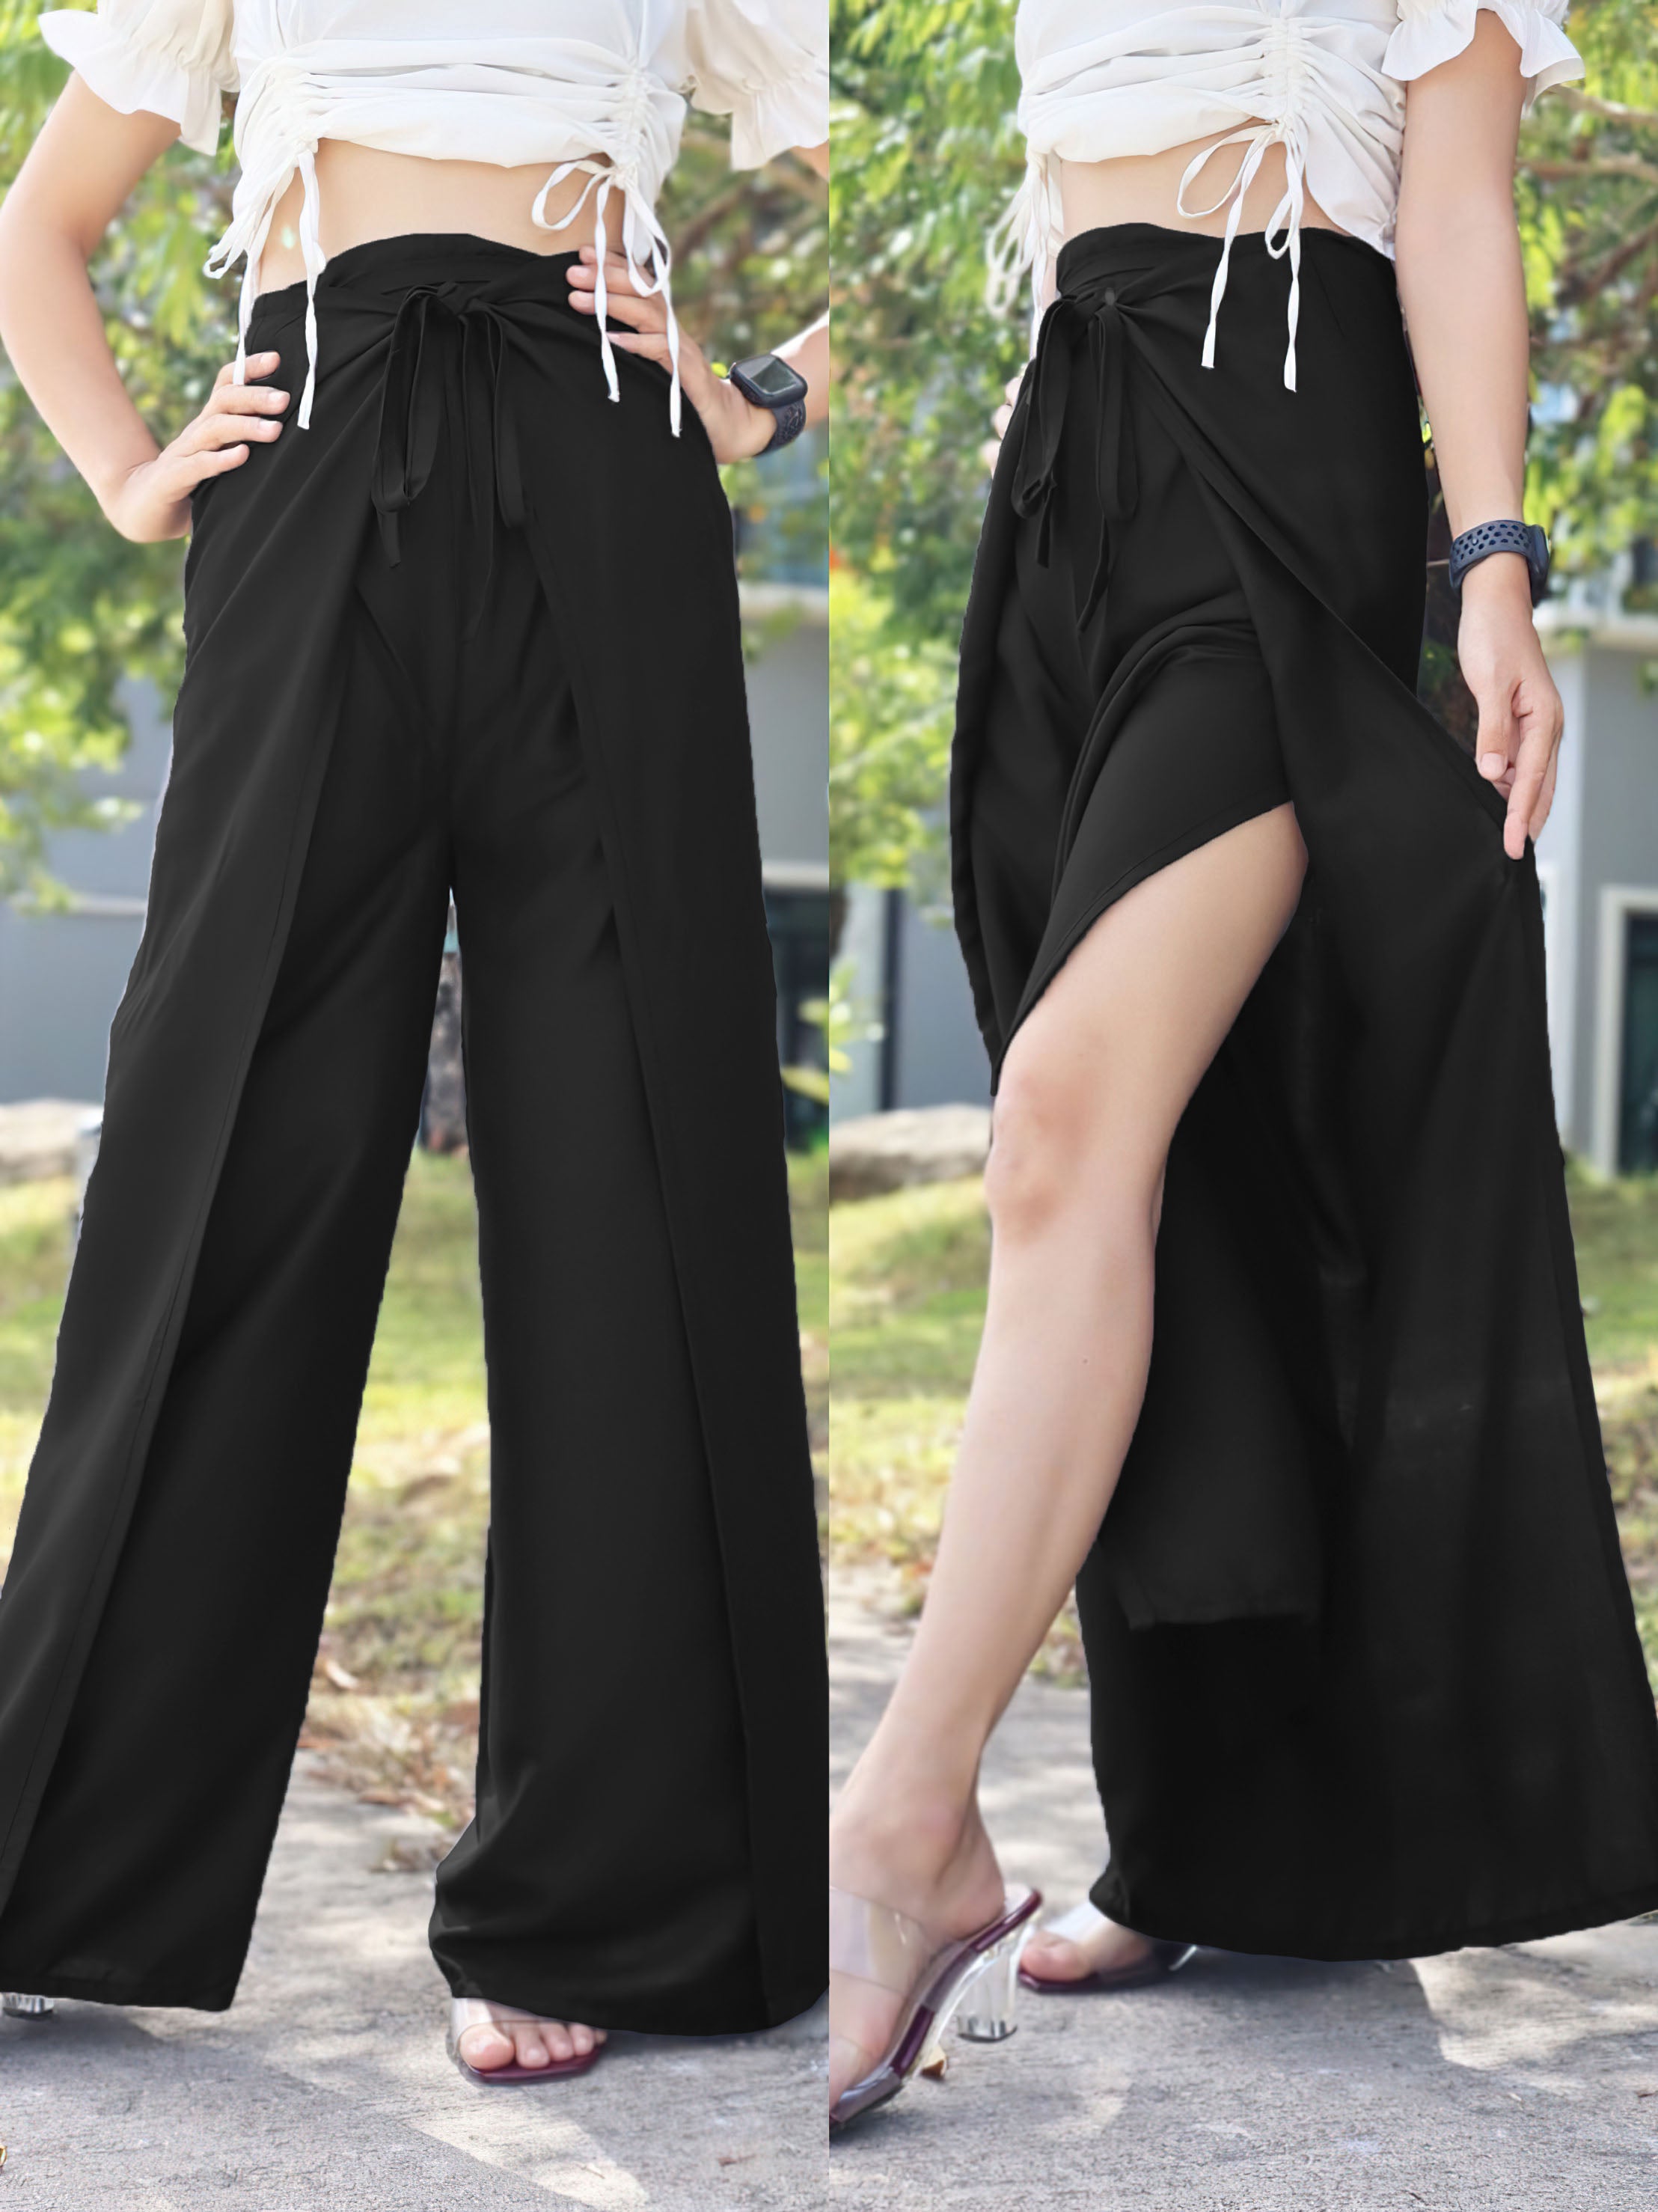 Black boho wrap pants with adjustable waist tie and high side slit, paired with a white lace-up crop top, showcased in an outdoor setting with natural light.